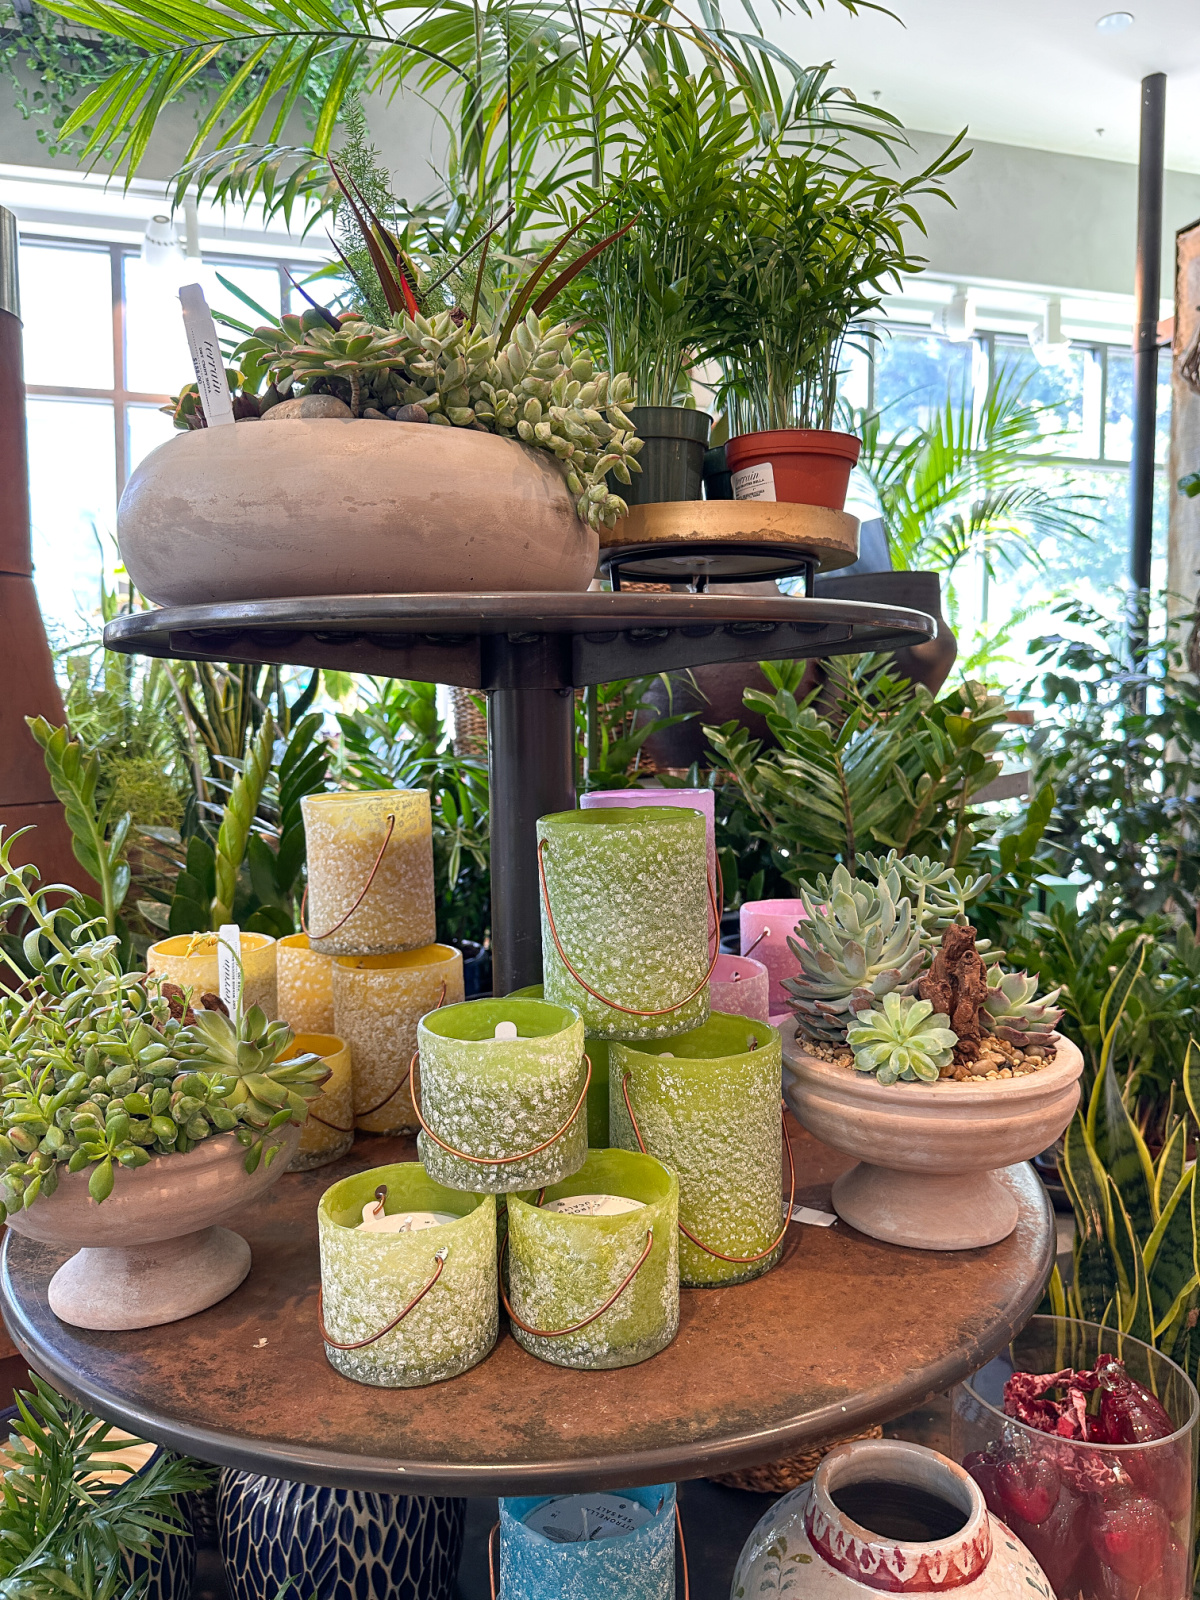 Display of green citronella candles at Terraine.